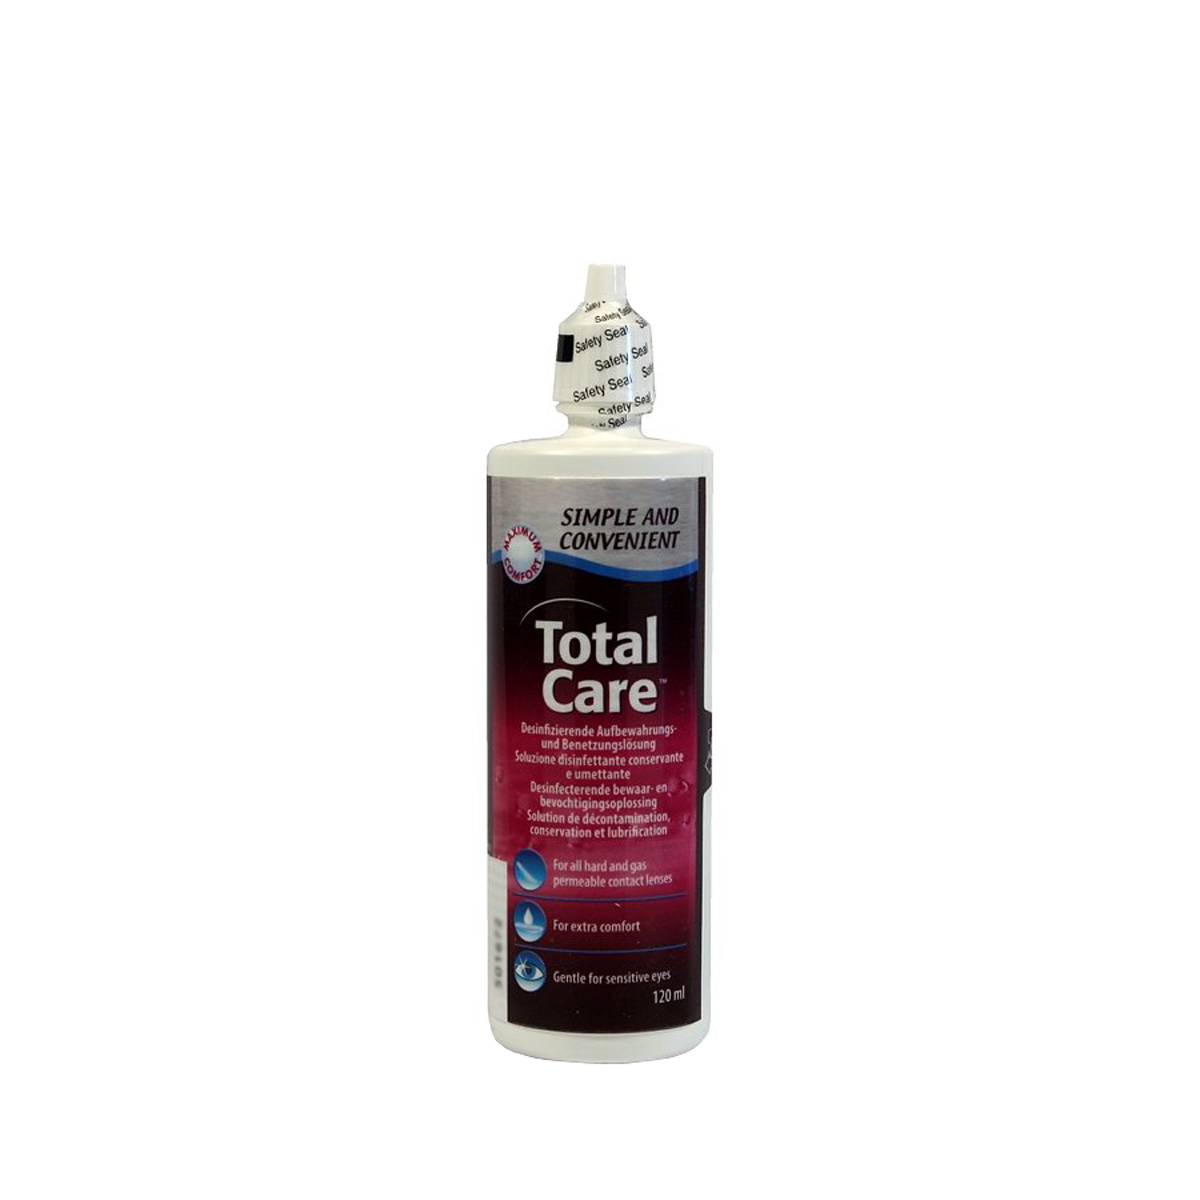 Image of Total Care Disinfecting Storing and Wetting solution 120ml